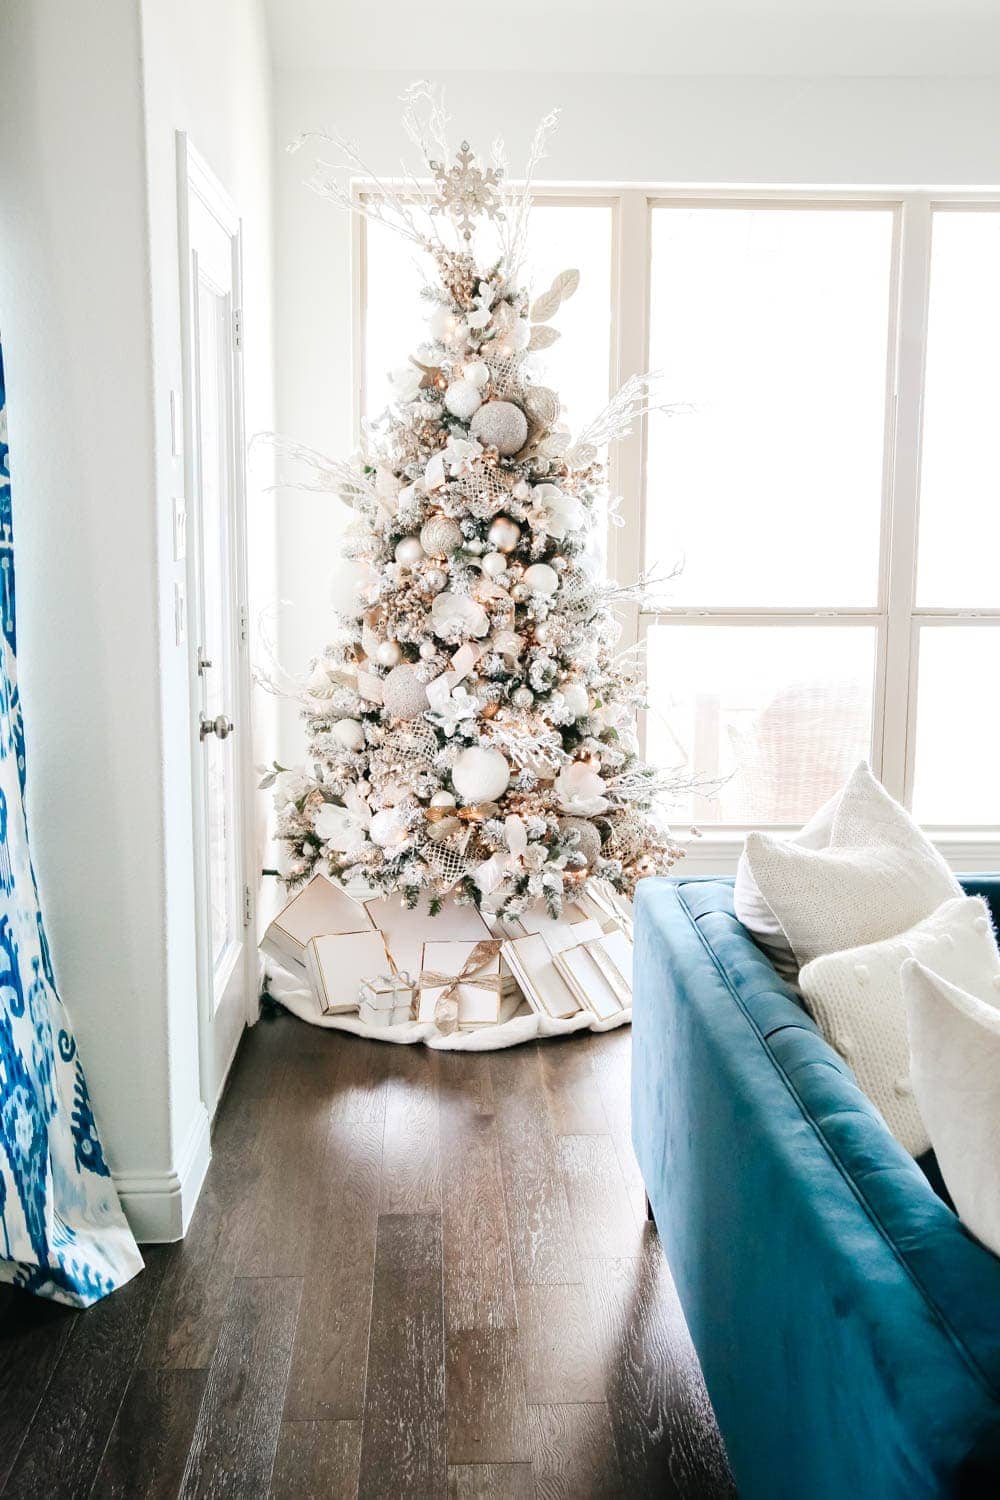 White flocked Christmas tree decorated with silver and gold ornaments.